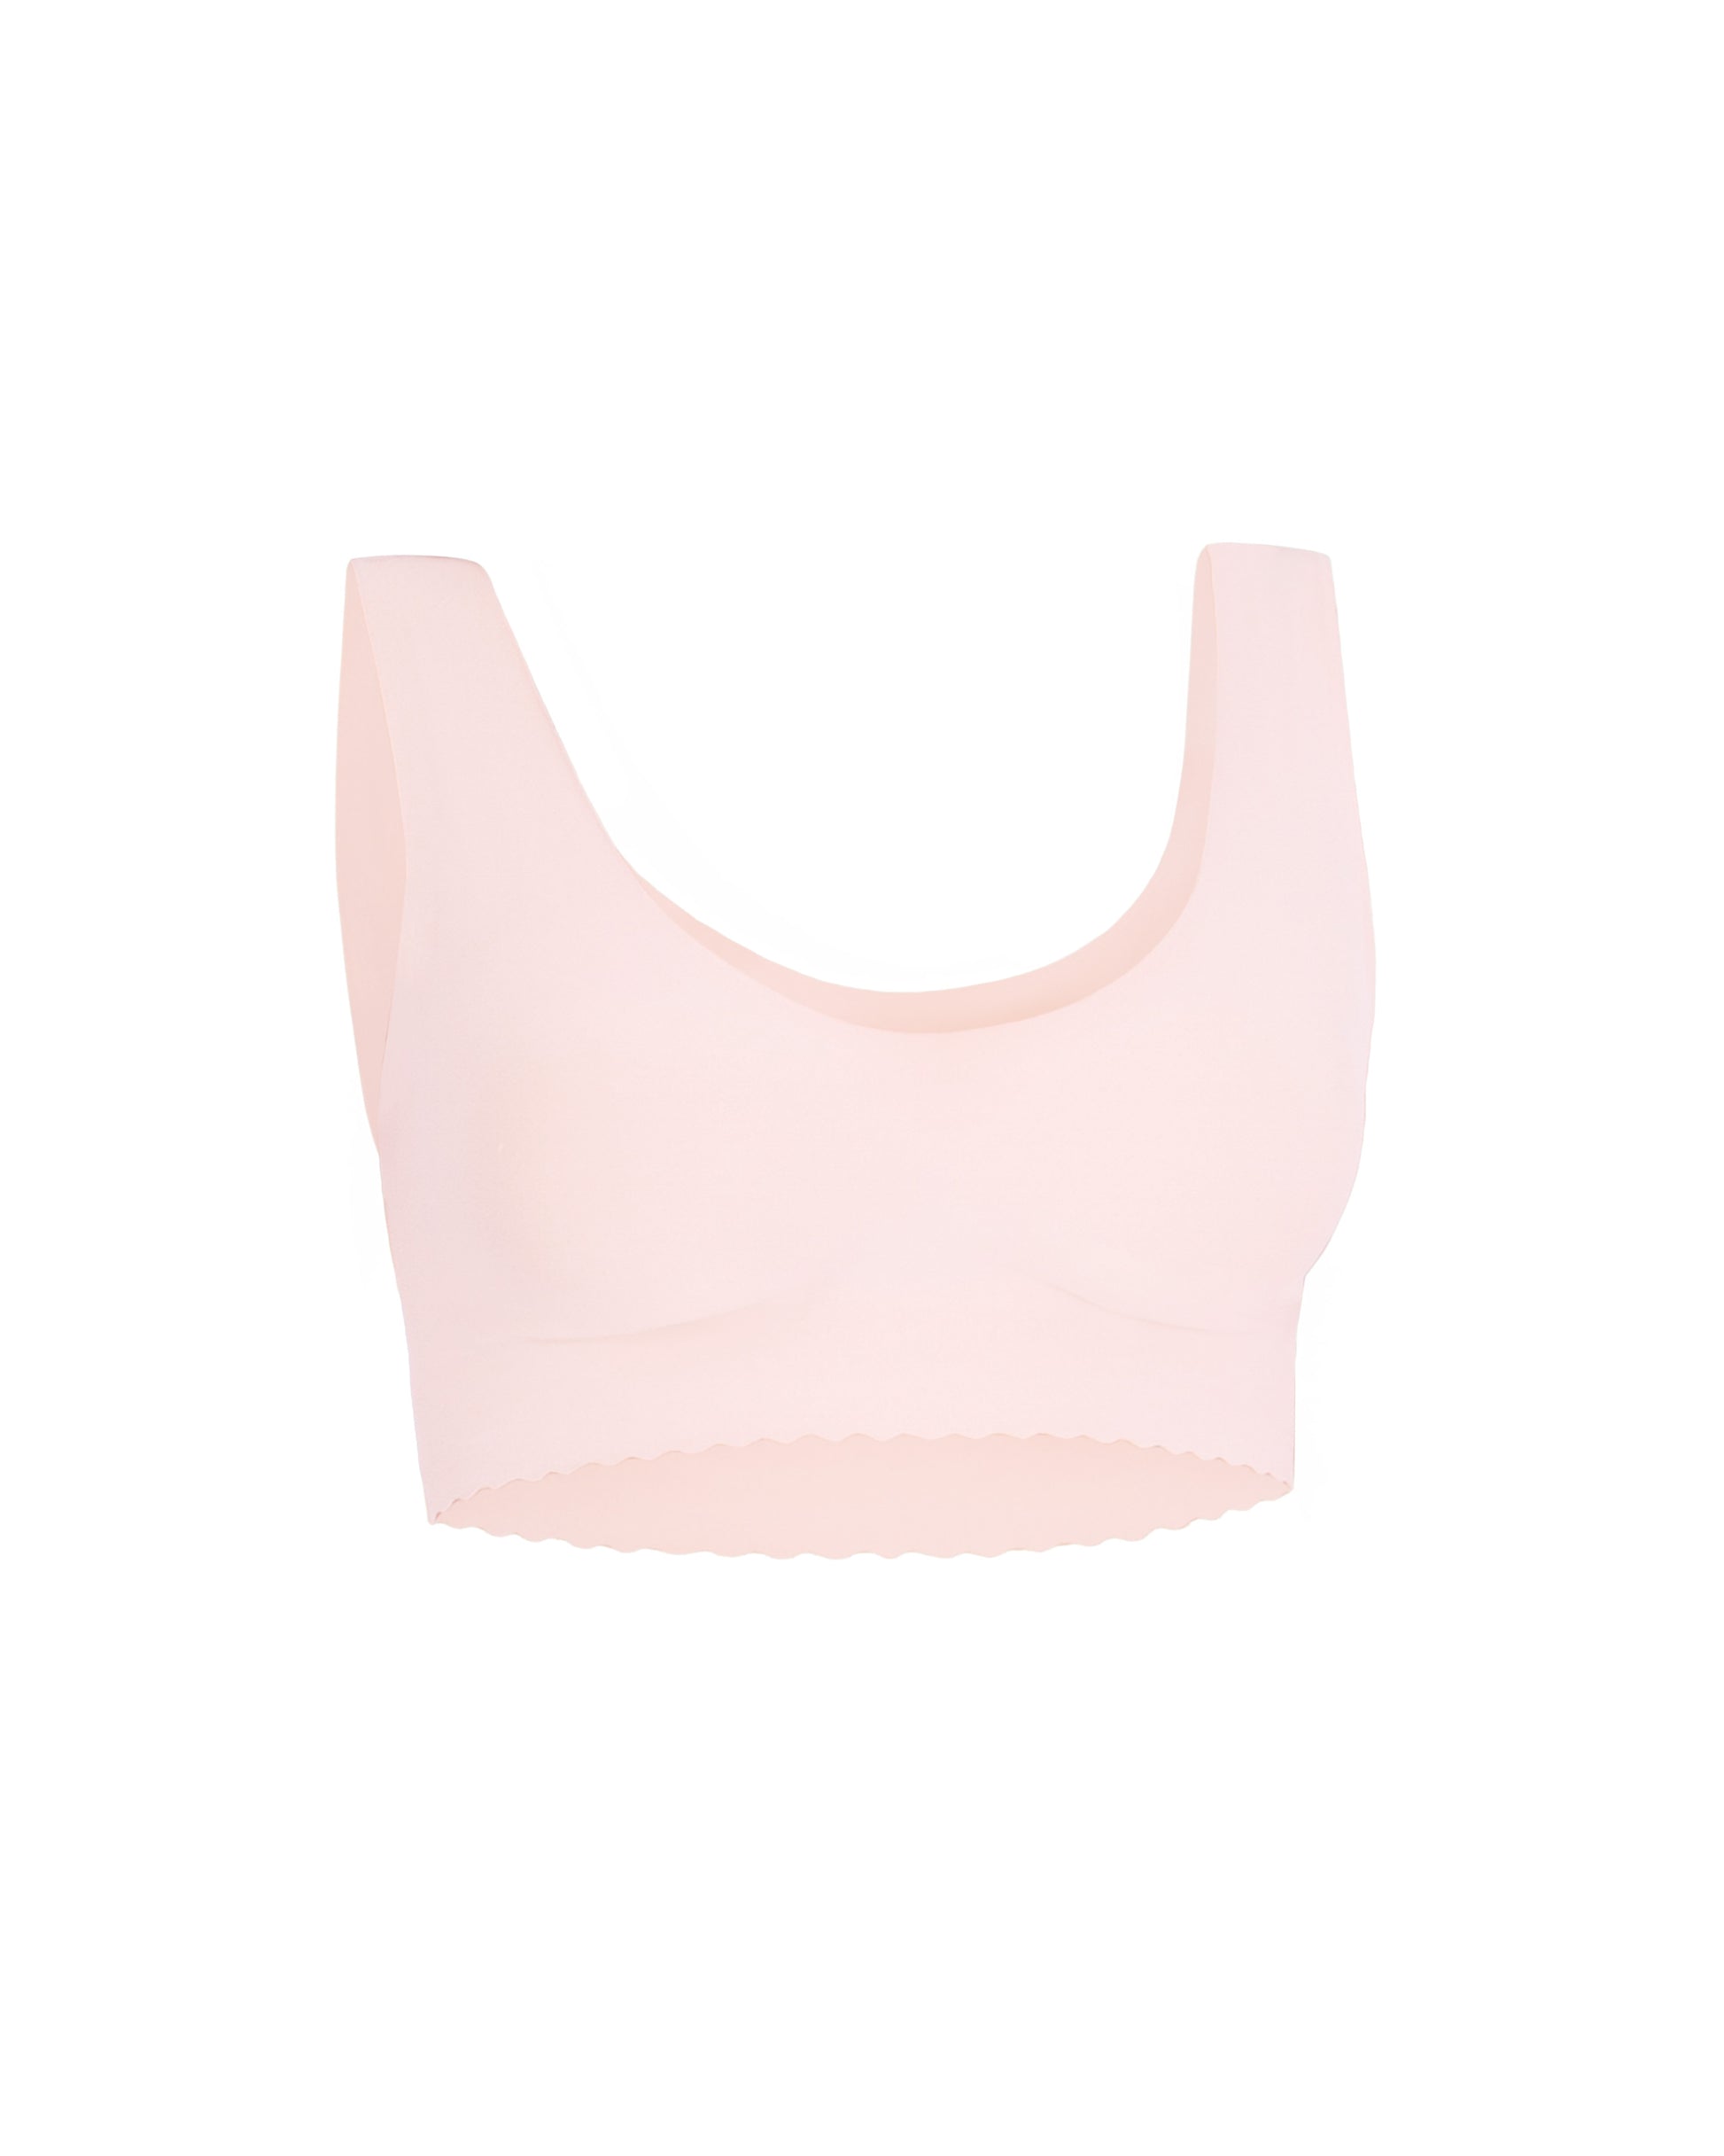 La Moda Wear - Barely There Be Free Seamless Bra – Size A to C Cup -  Everyday Comfort Bra for Women